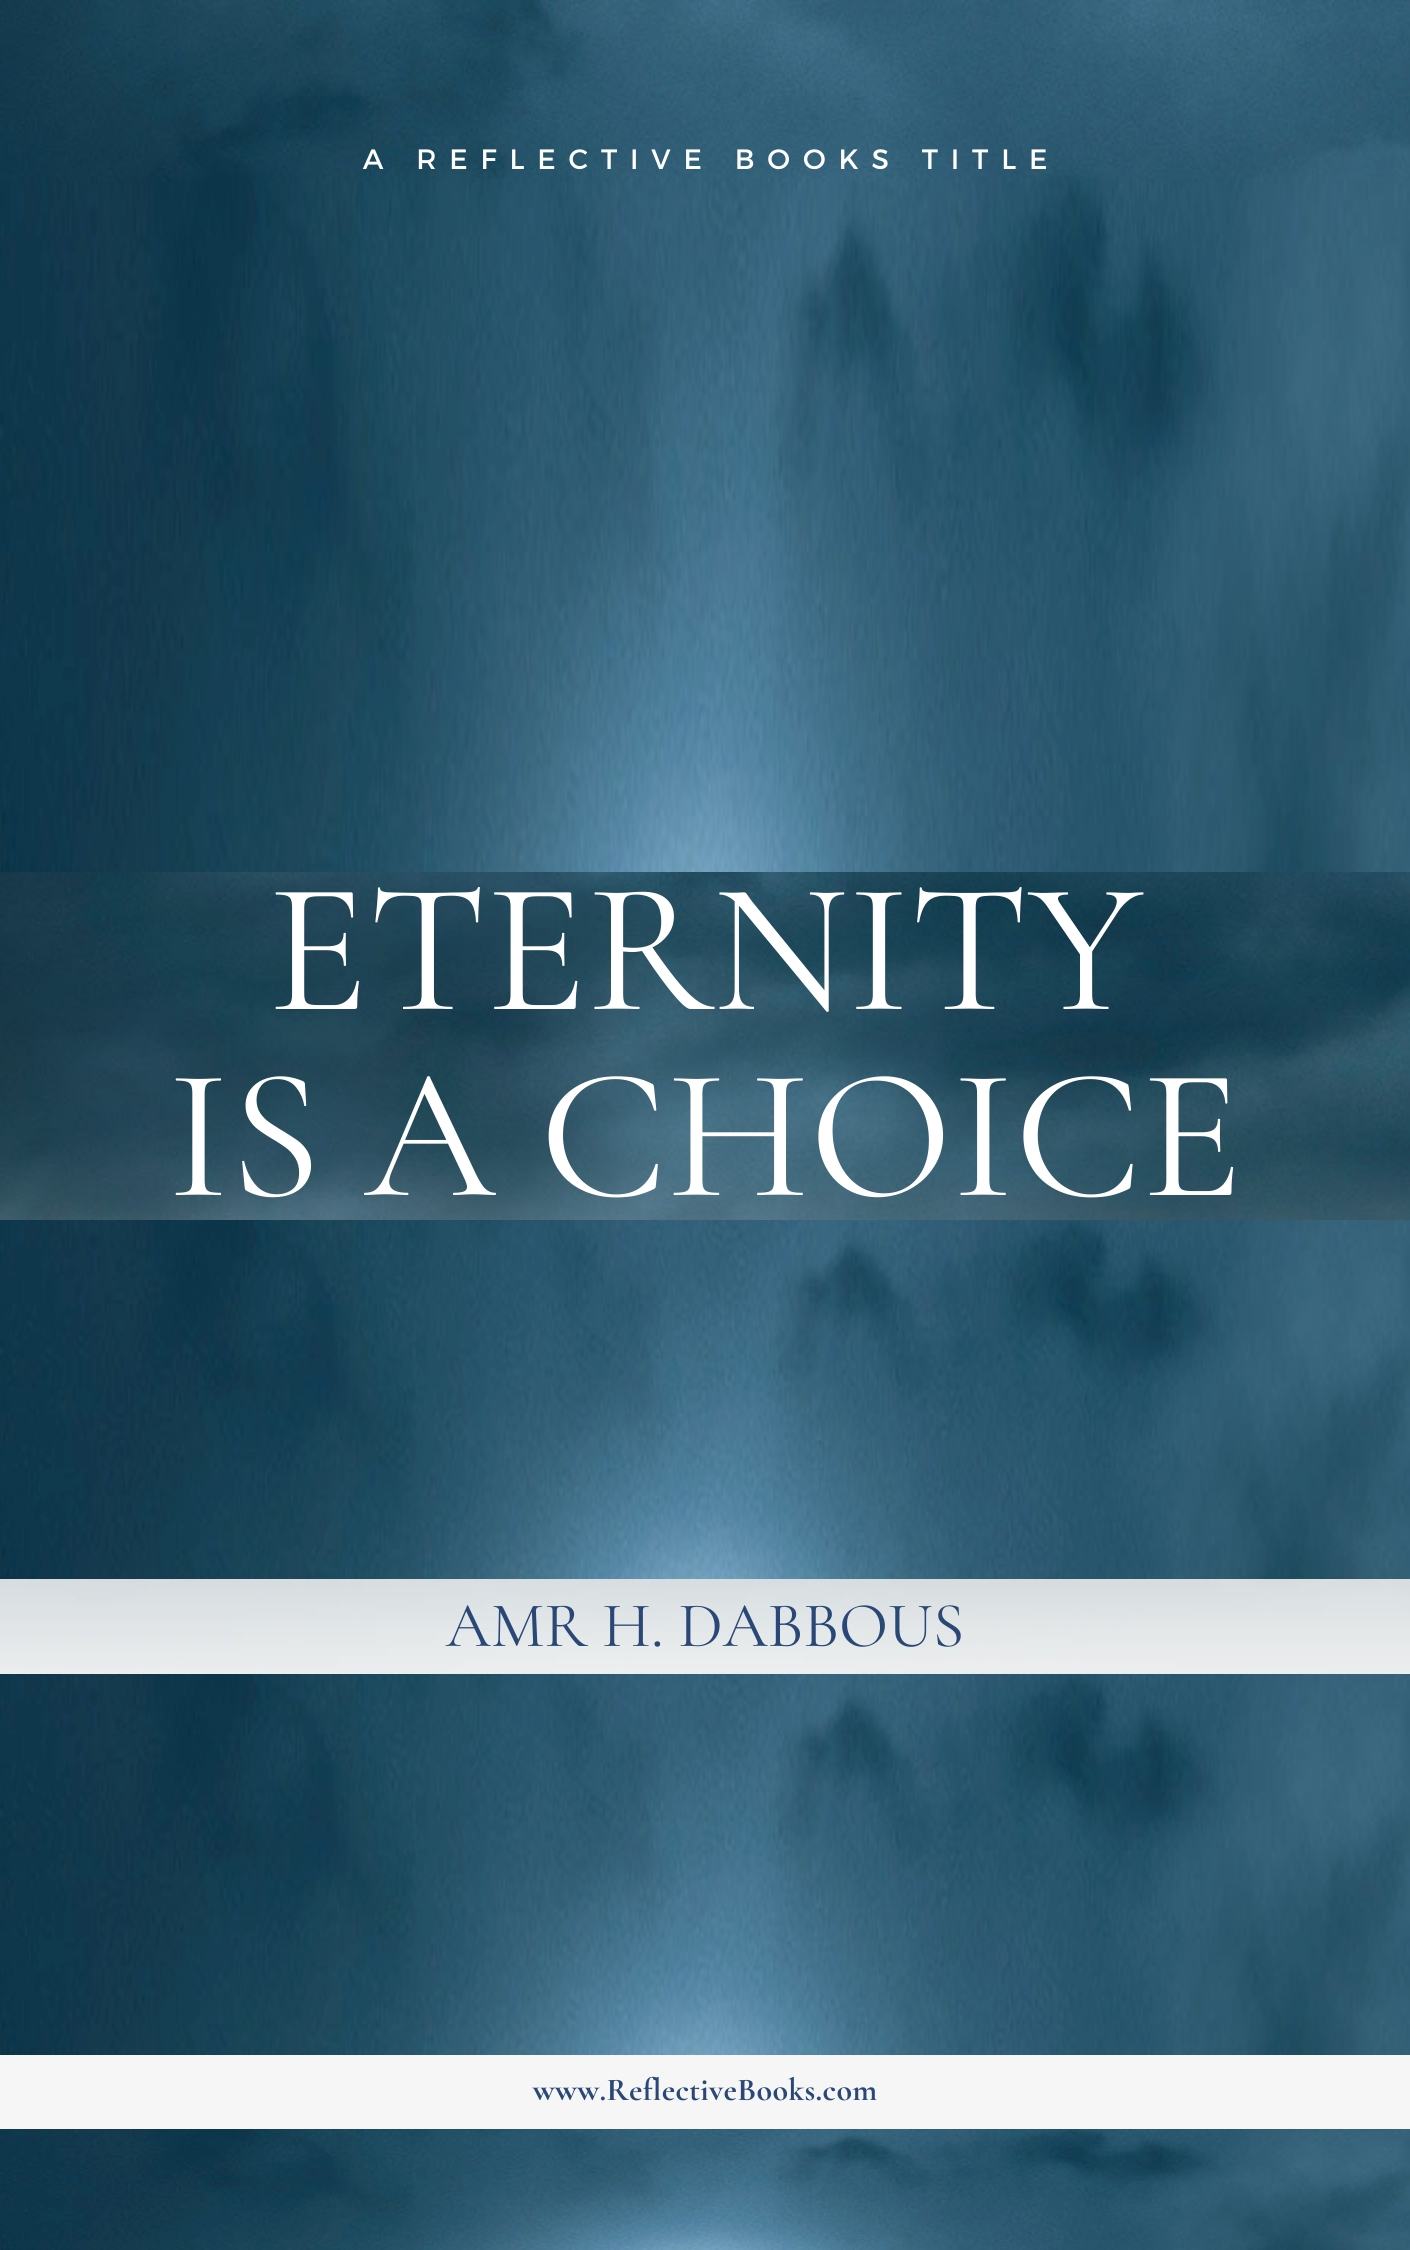 FREE: ETERNITY IS A CHOICE by Amr Dabbous